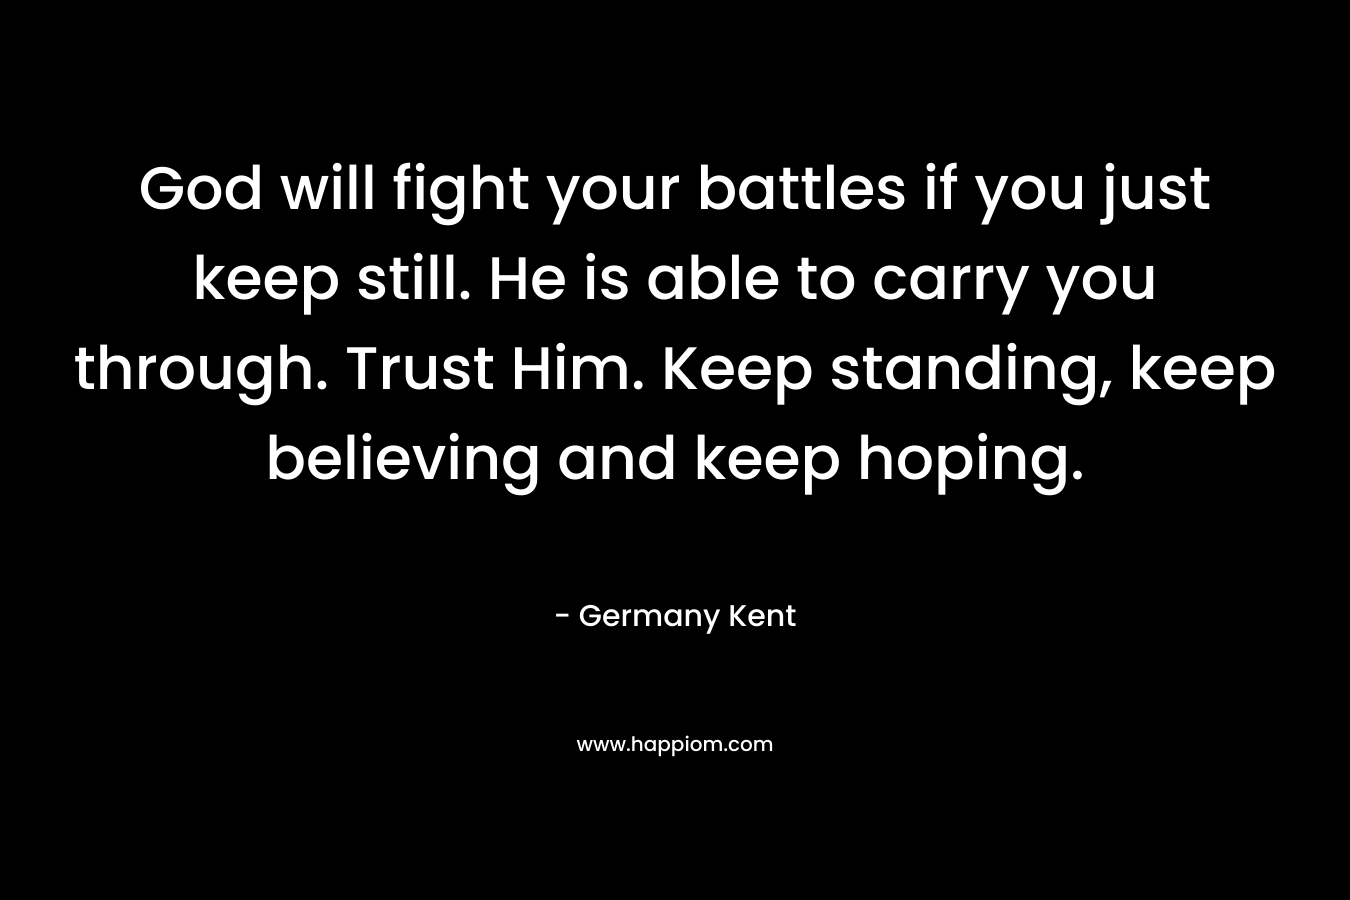 God will fight your battles if you just keep still. He is able to carry you through. Trust Him. Keep standing, keep believing and keep hoping. – Germany Kent